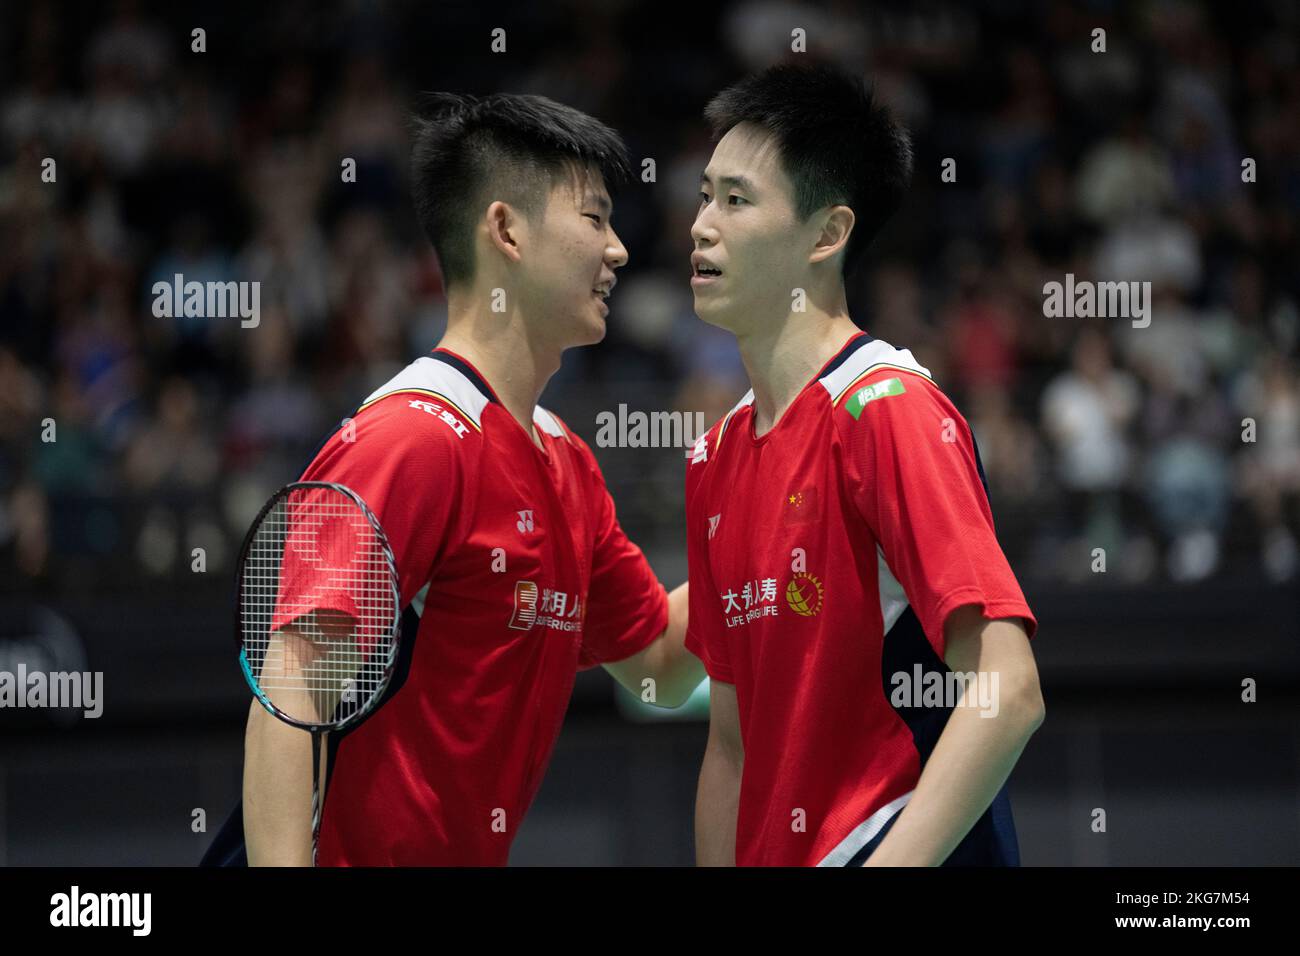 SYDNEY, AUSTRALIA - NOVEMBER 20: Liu Yu Chen and Ou Xuan Yi of China in action during the mens doubles match between Ong and Teo of Malaysia and Liu a Stock Photo